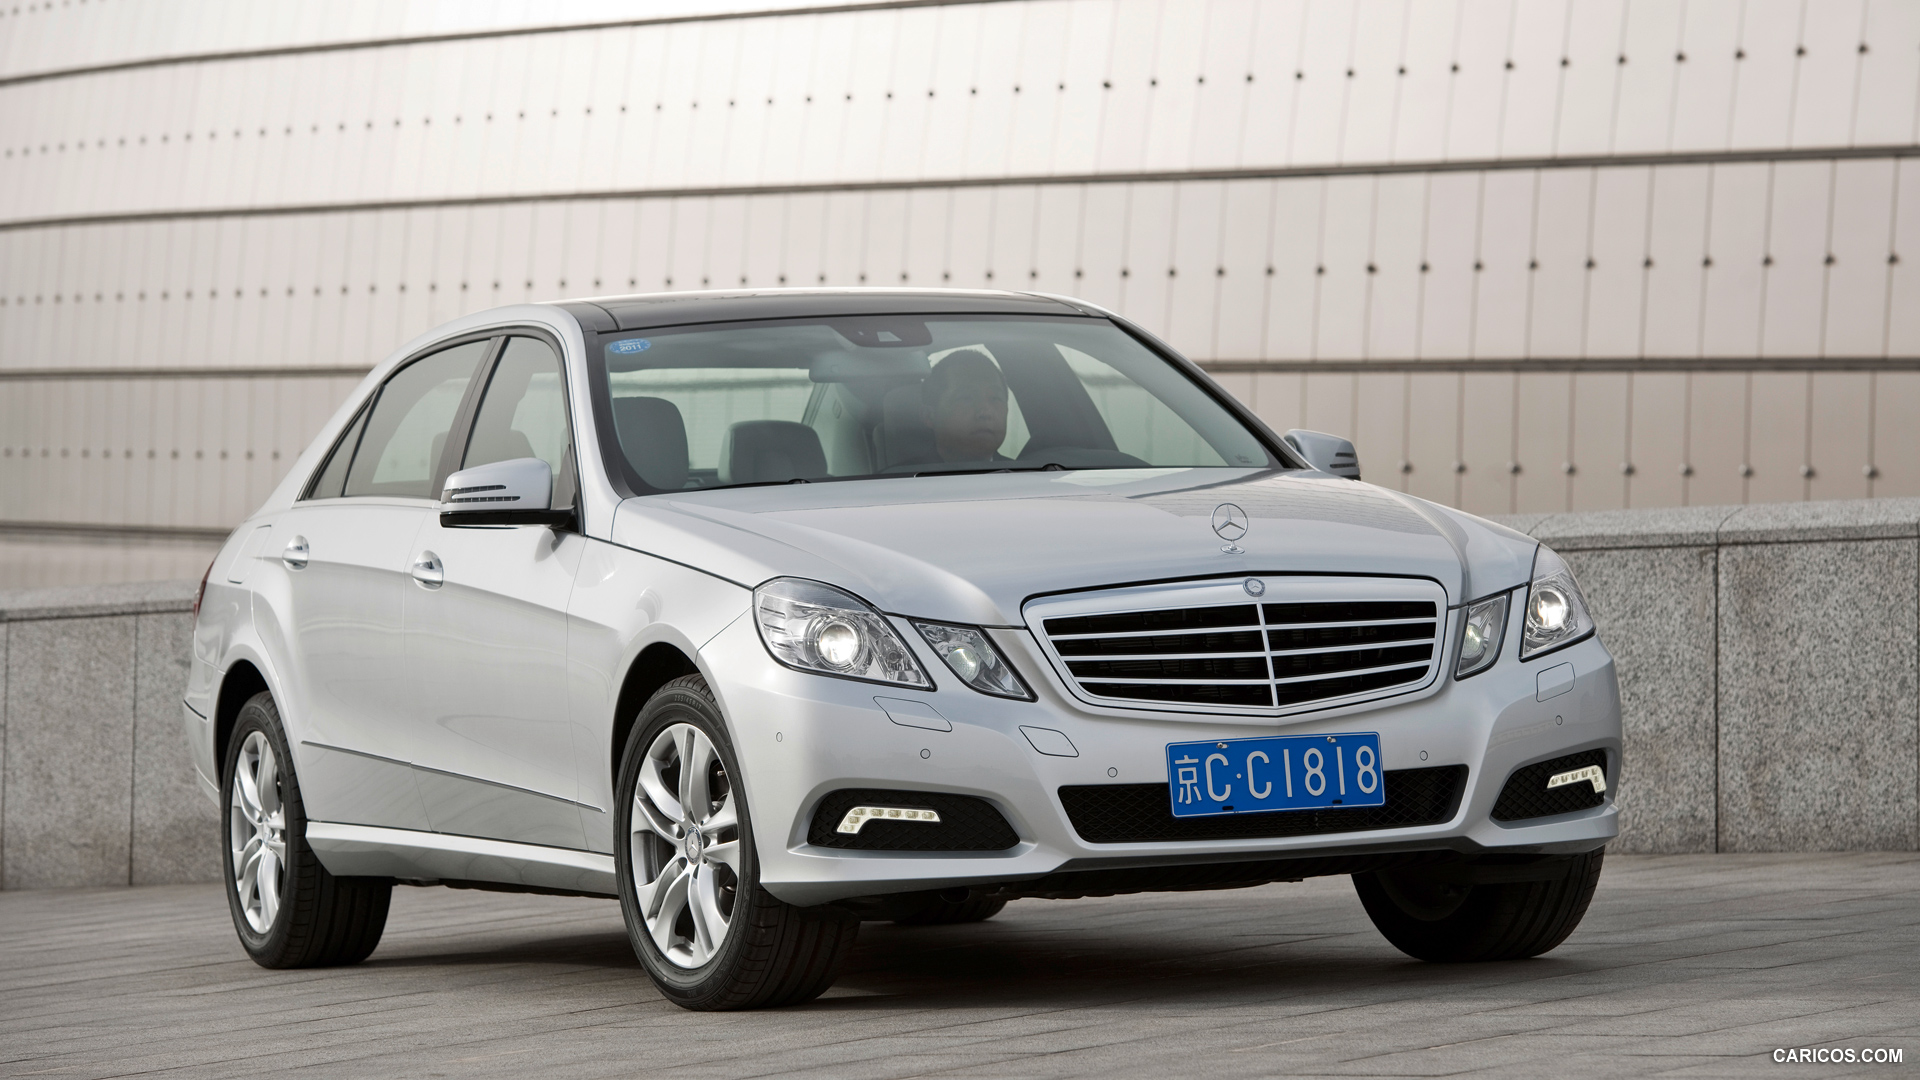 Mercedes-Benz E-Class L (2011)  - Front Angle , #5 of 17